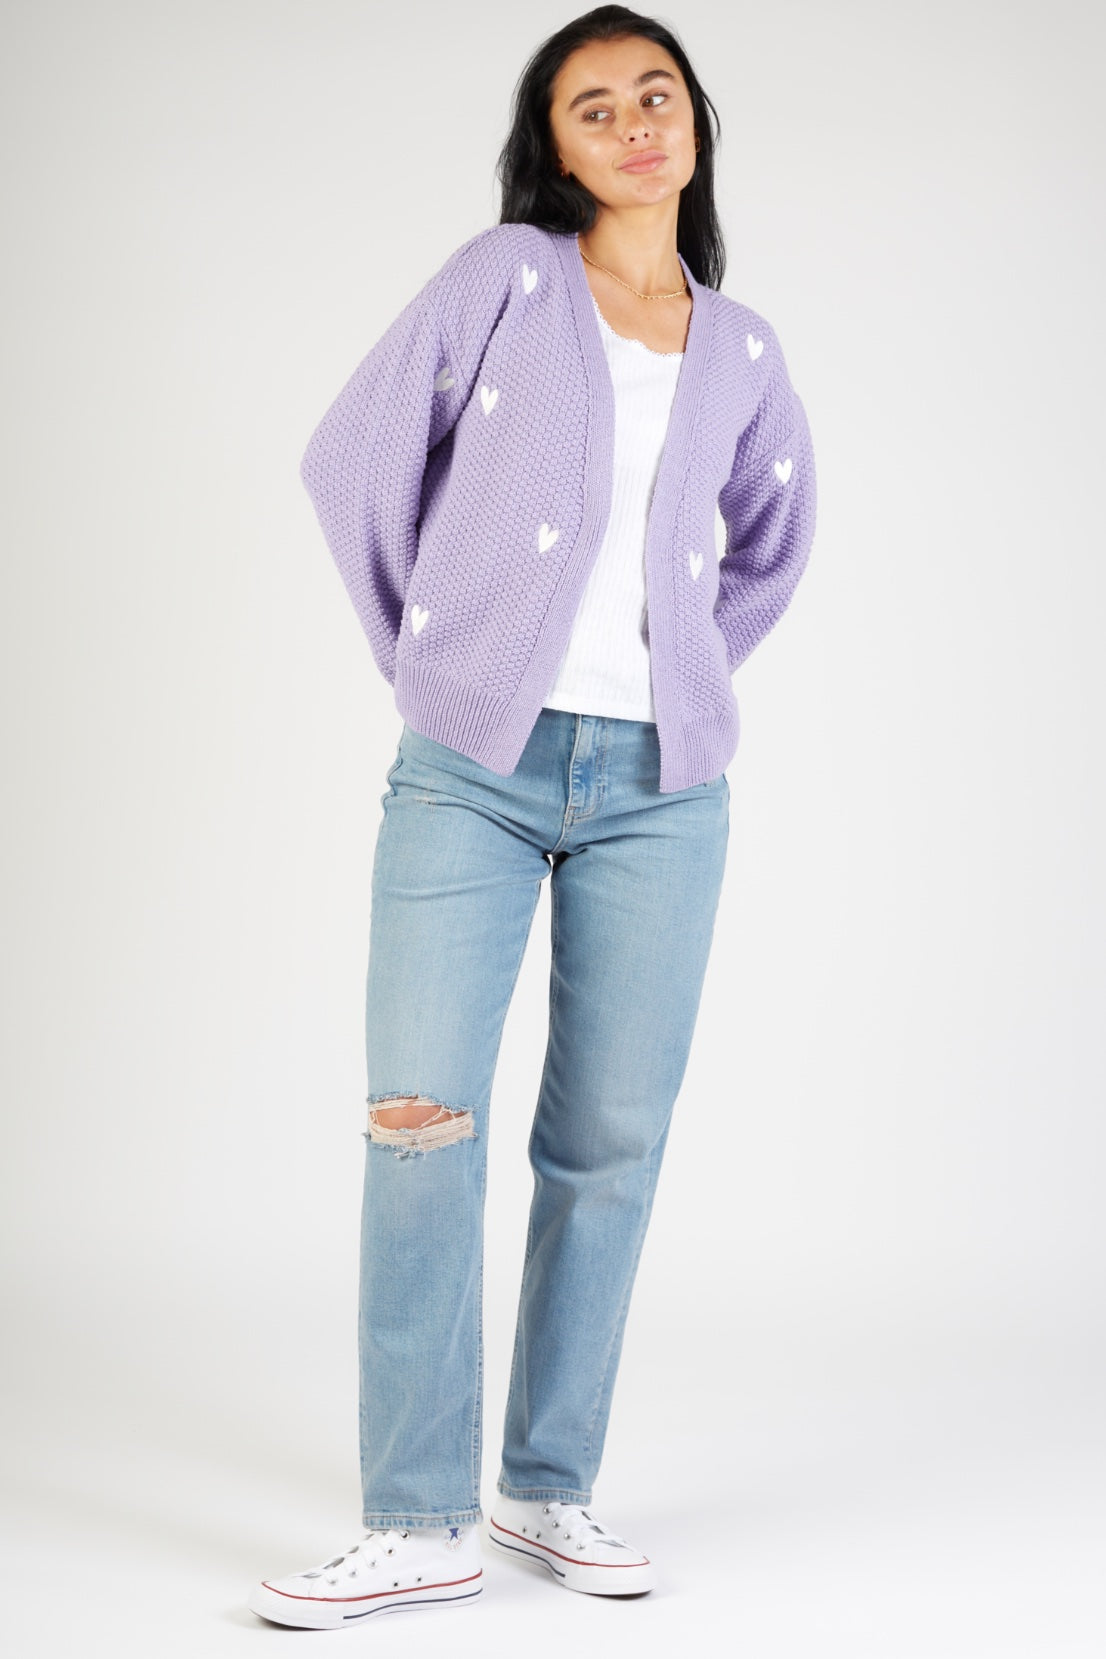 O&F Heart Embroidered Cardigan - Lilac